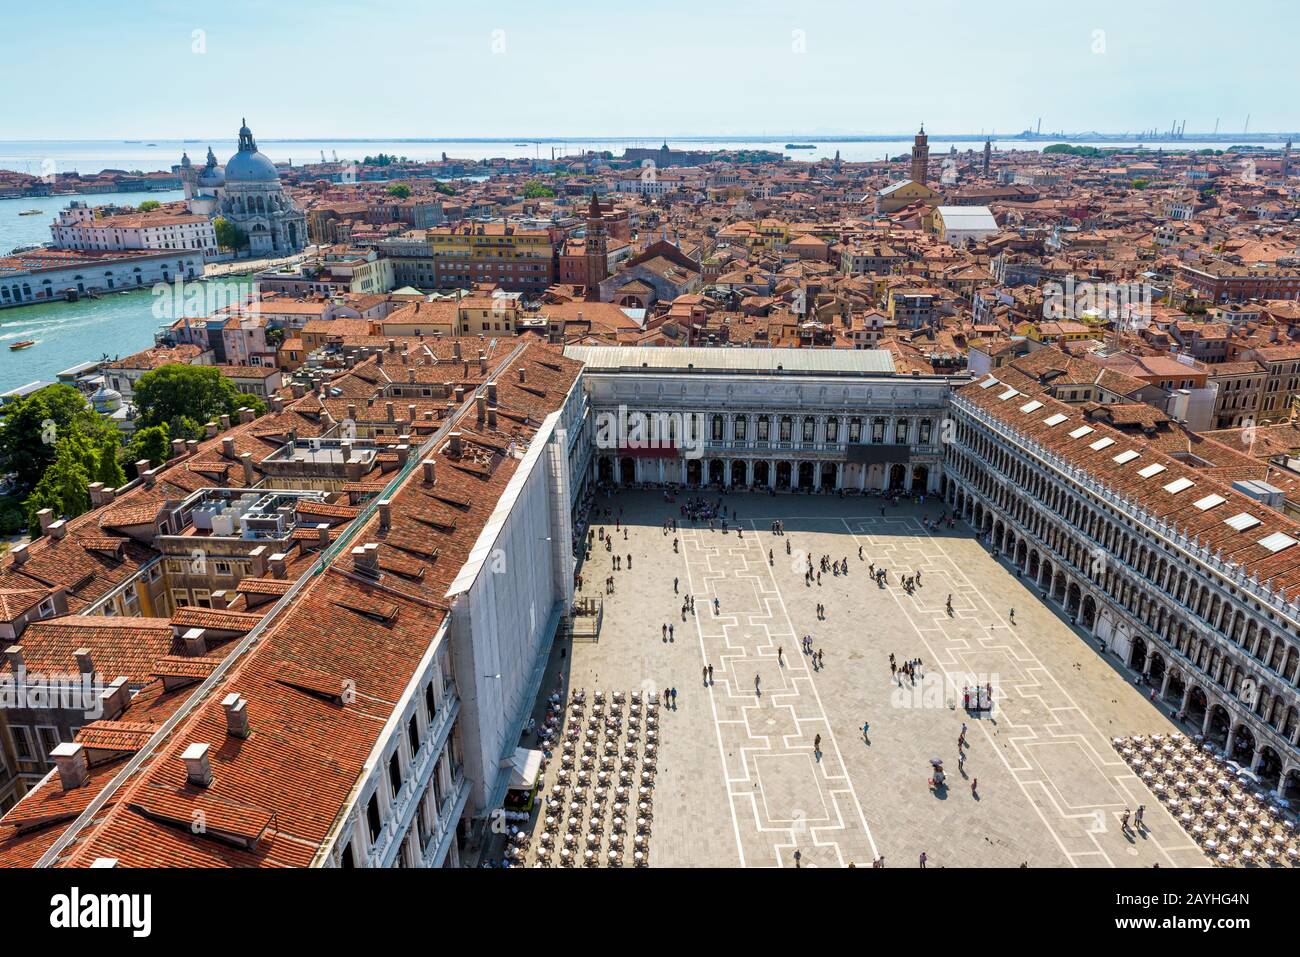 Piazza San Marco, or St Mark's Square, in Venice, Italy. This is the main square of Venice. Stock Photo